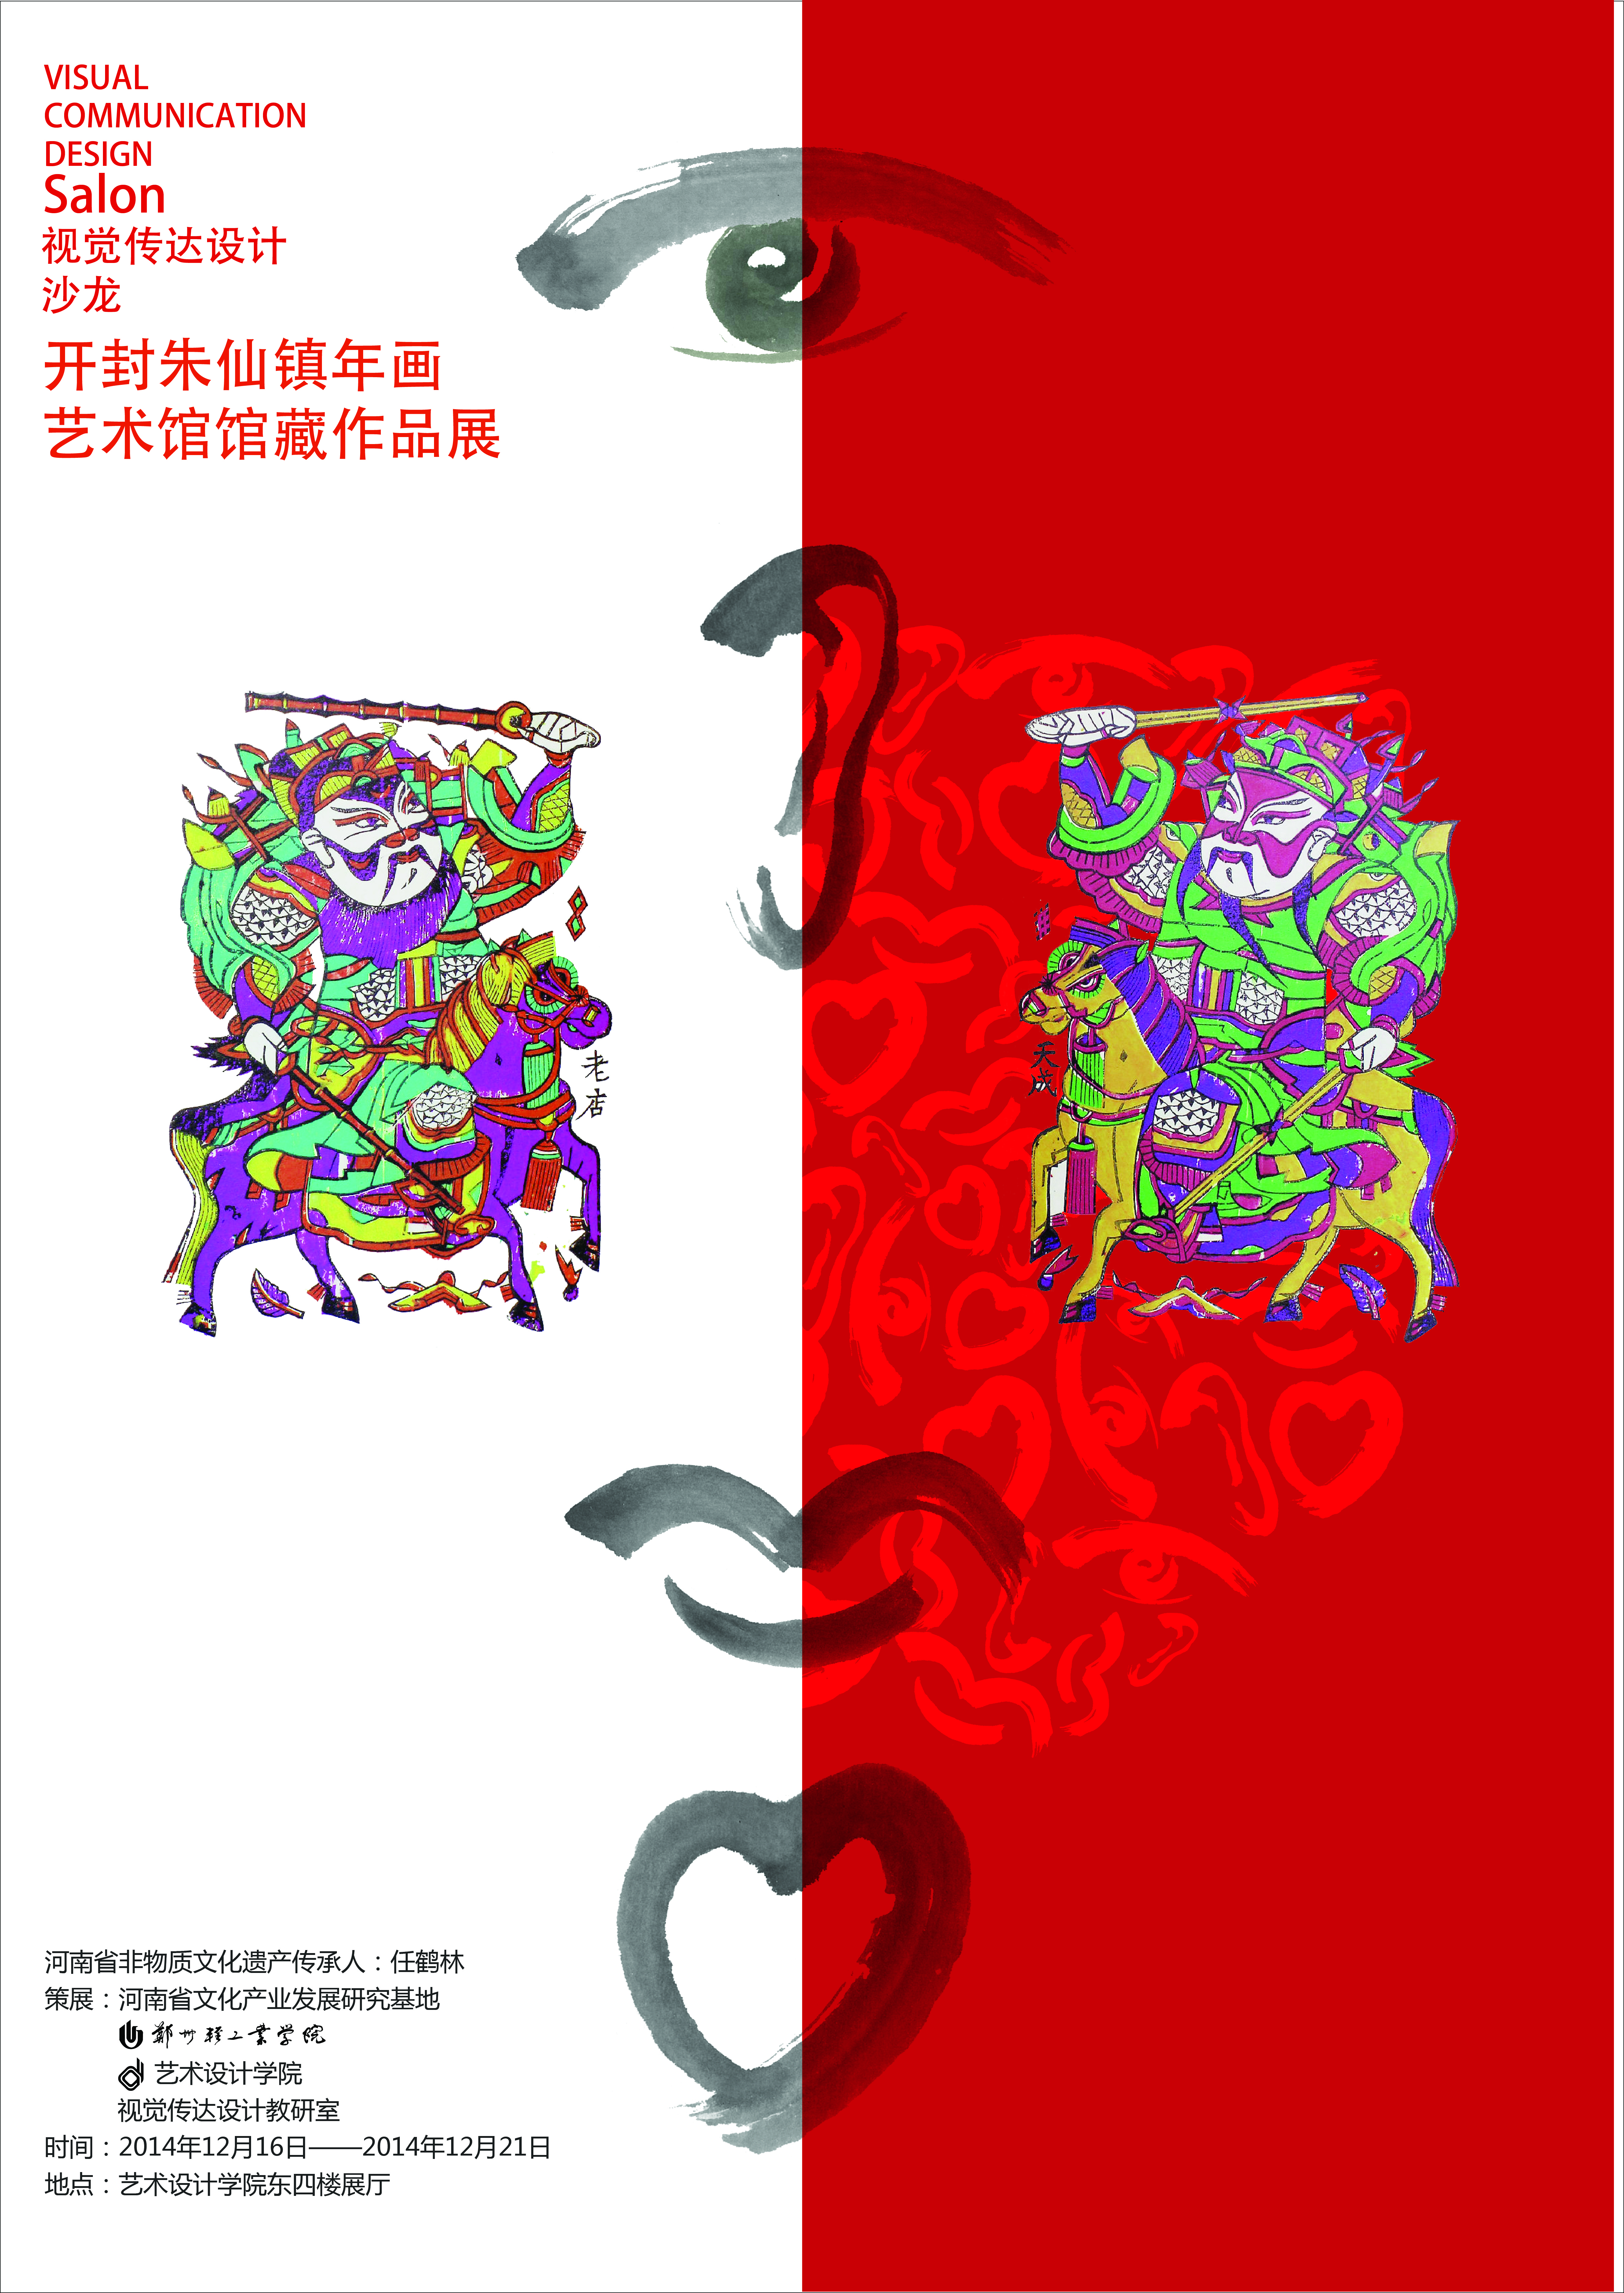 Poster of Exhibition of New Year Paintings of Zhuxianzhen Town, December 2014